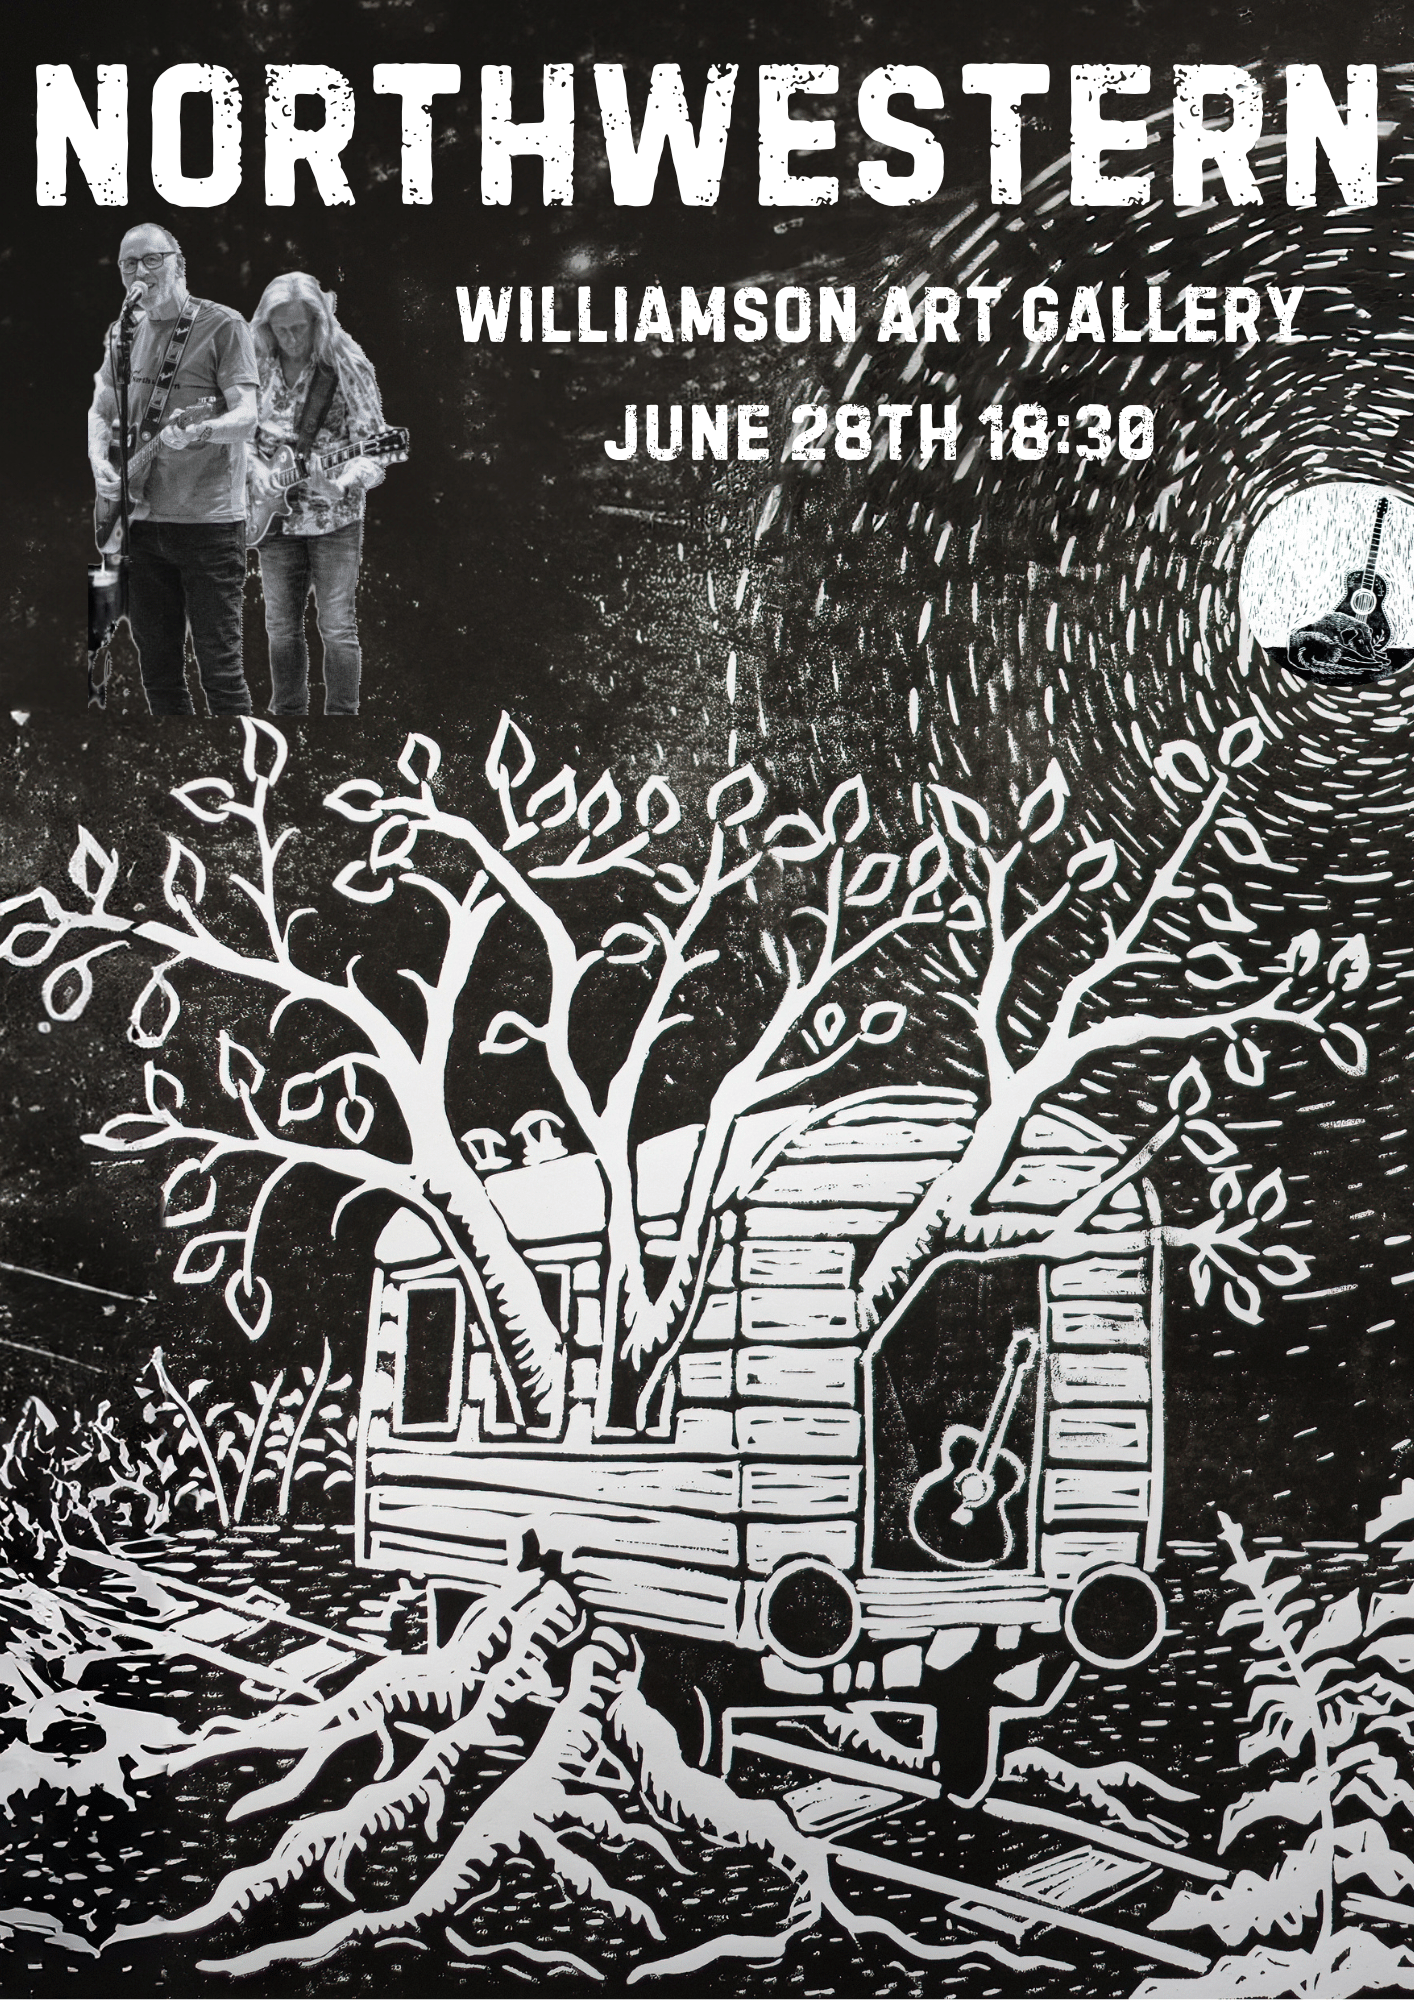 Black and white poster for band Northwestern performing at Williamson Art Gallery on June 28th. Graphic is a drawing of an old wooden railway carriage with trees growing out of it.